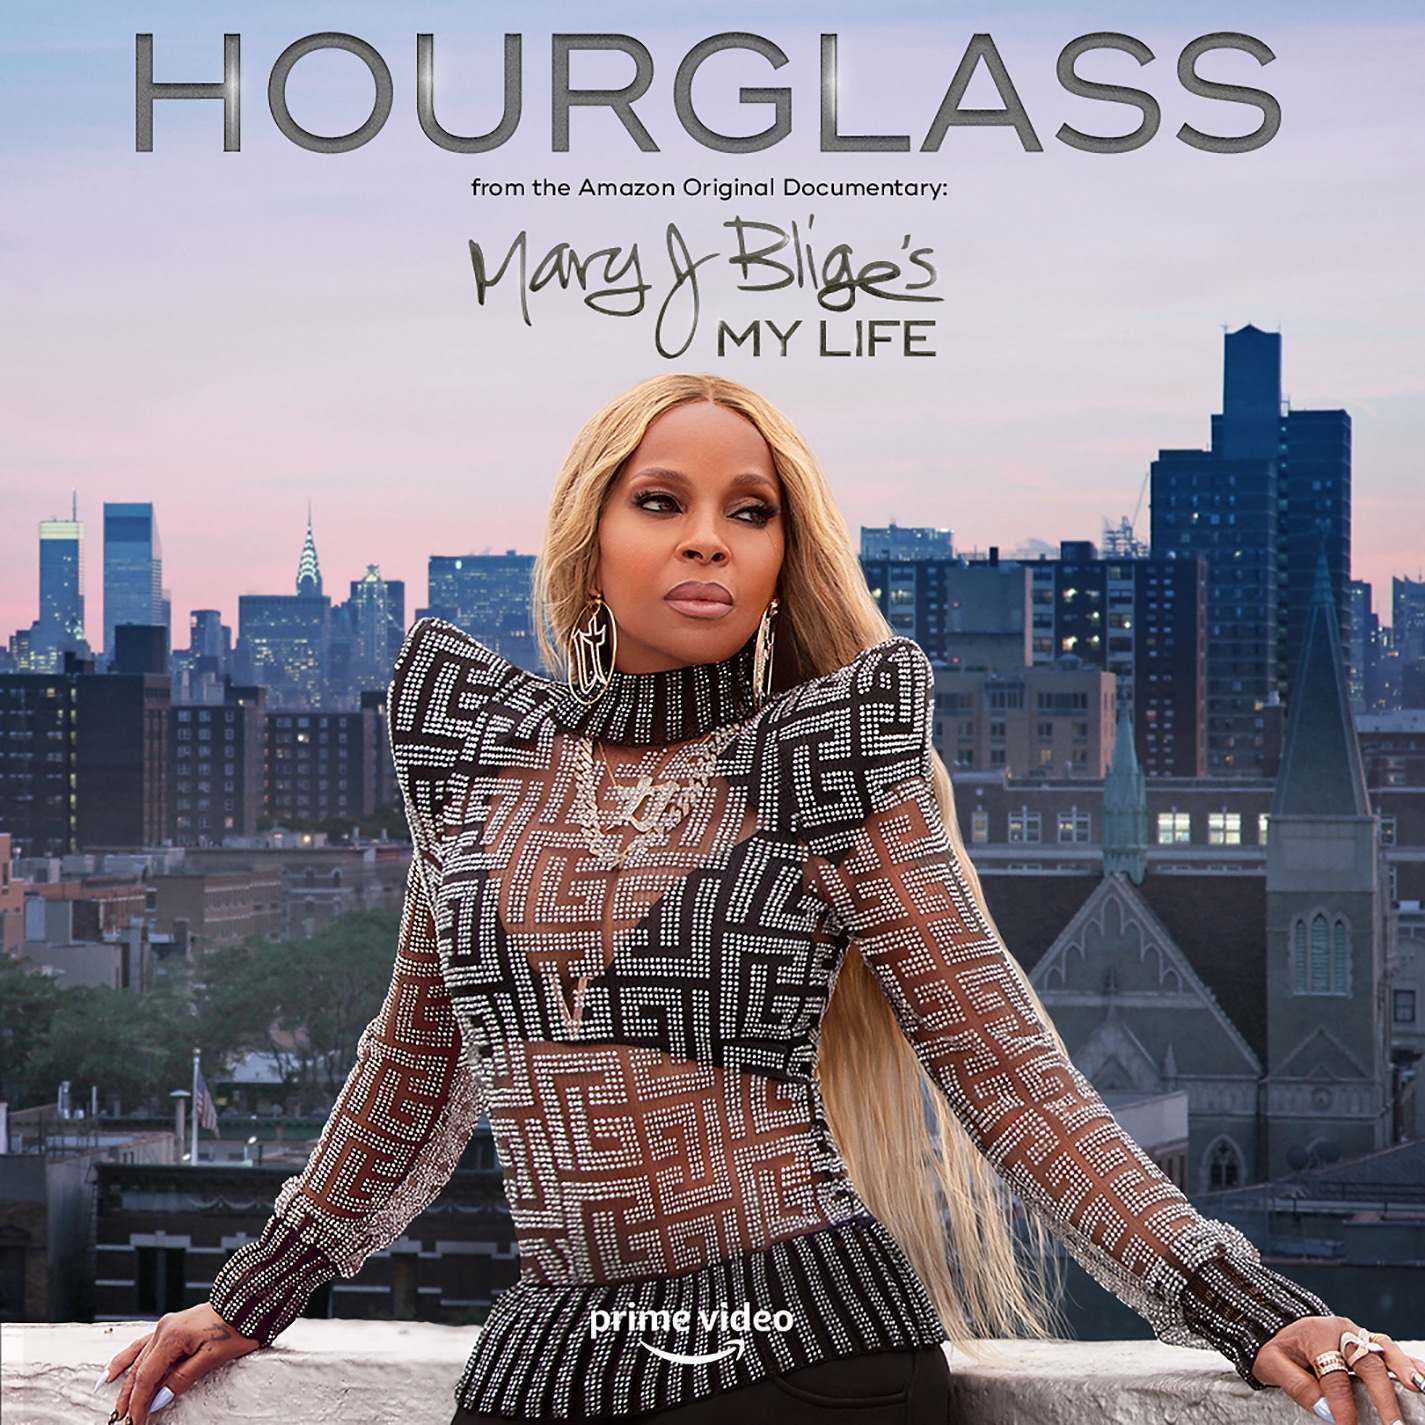 Mary J. Blige Shares Her 'Hourglass' Single From Her Amazon Documentary 'Mary J. Blige's My Life'